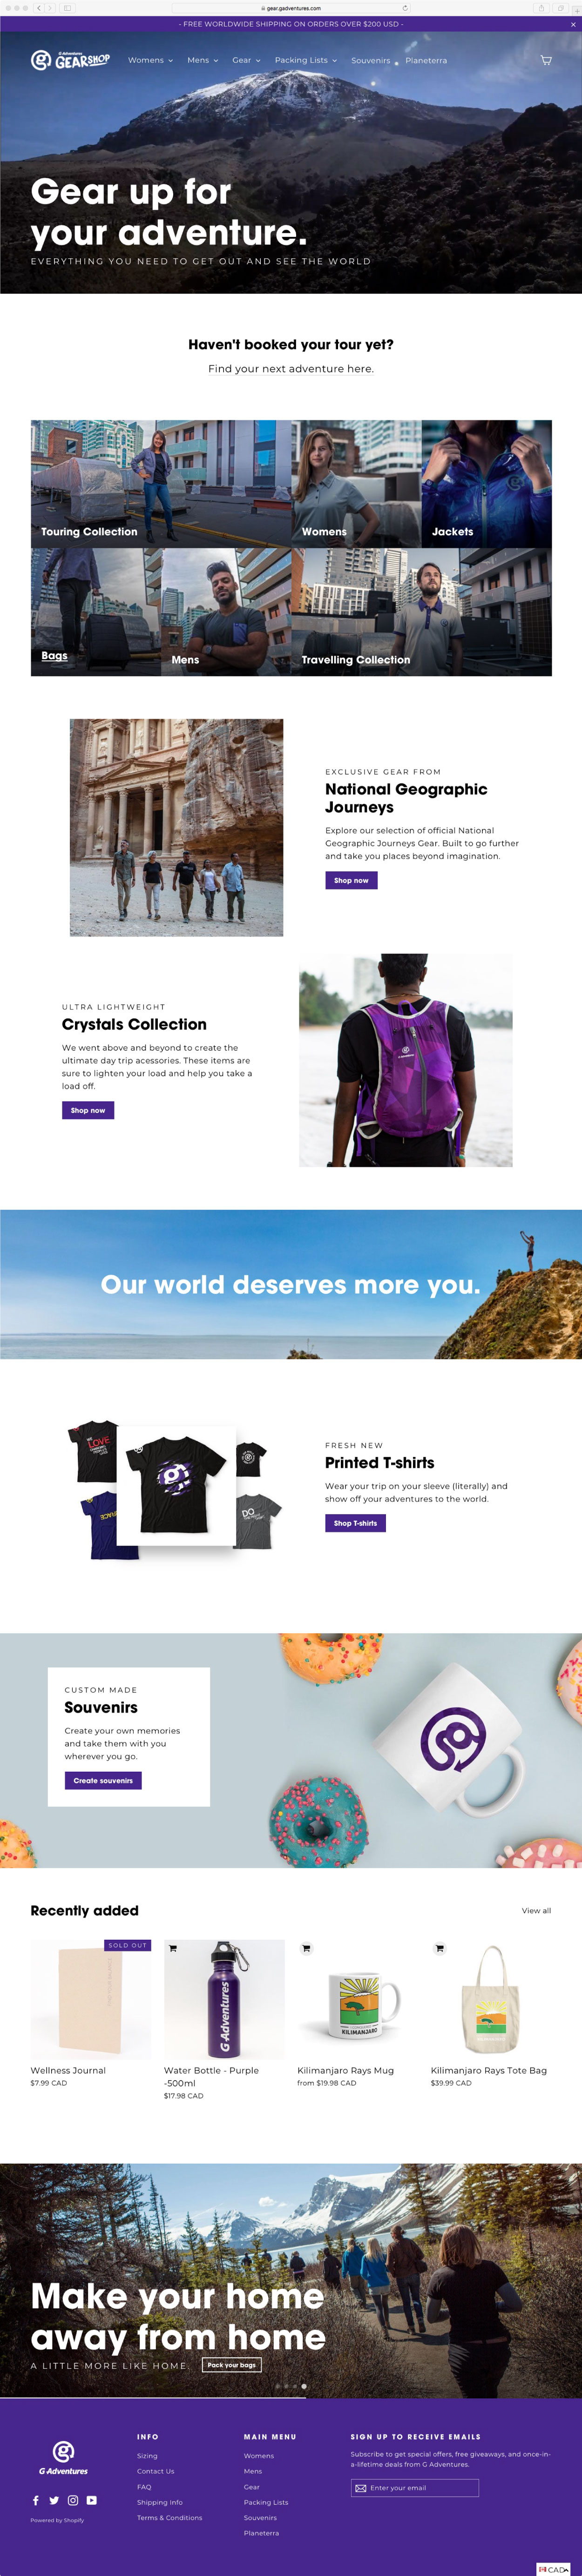 G_Adventures_Gear_shop_Home_Page_01